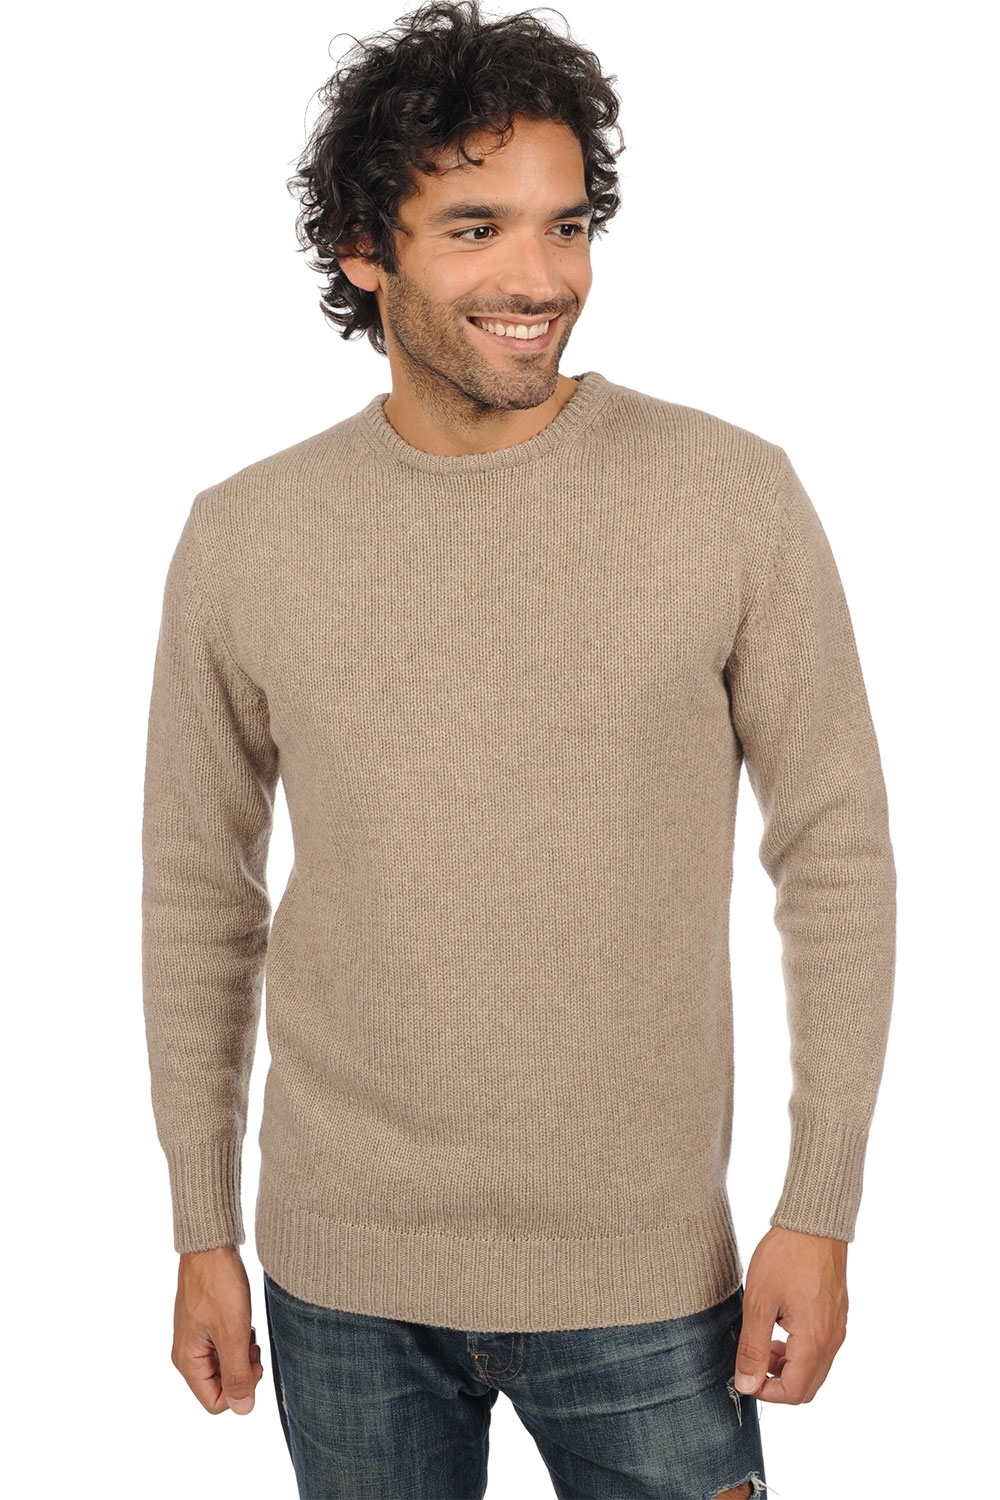 Cachemire pull homme bilal natural brown 2xl